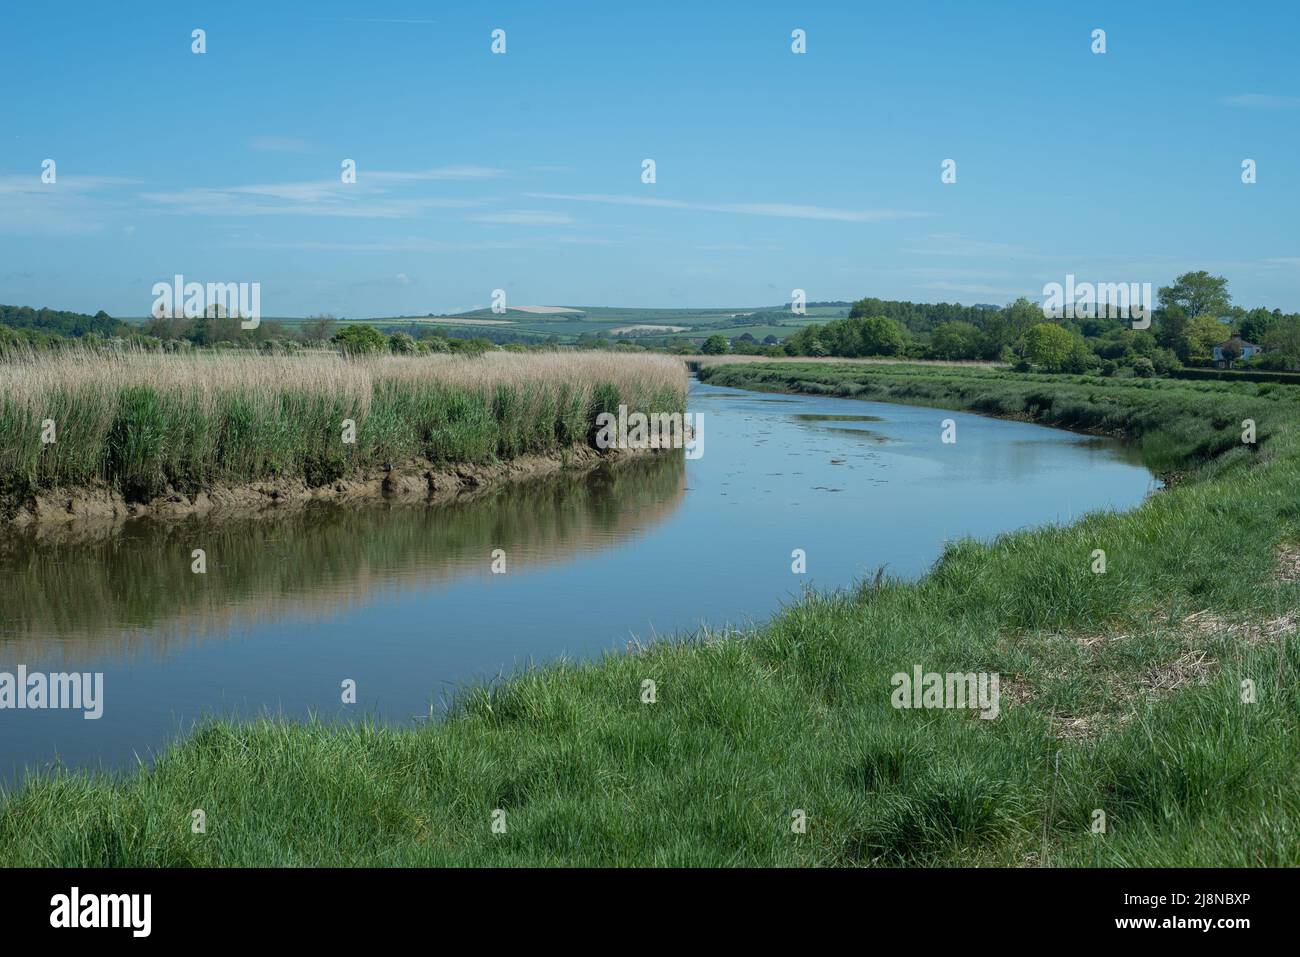 Beautiful picturesque scenery of a path leading around the River Arun in West Sussex, England. Part of the South Downs scenic area. Stock Photo